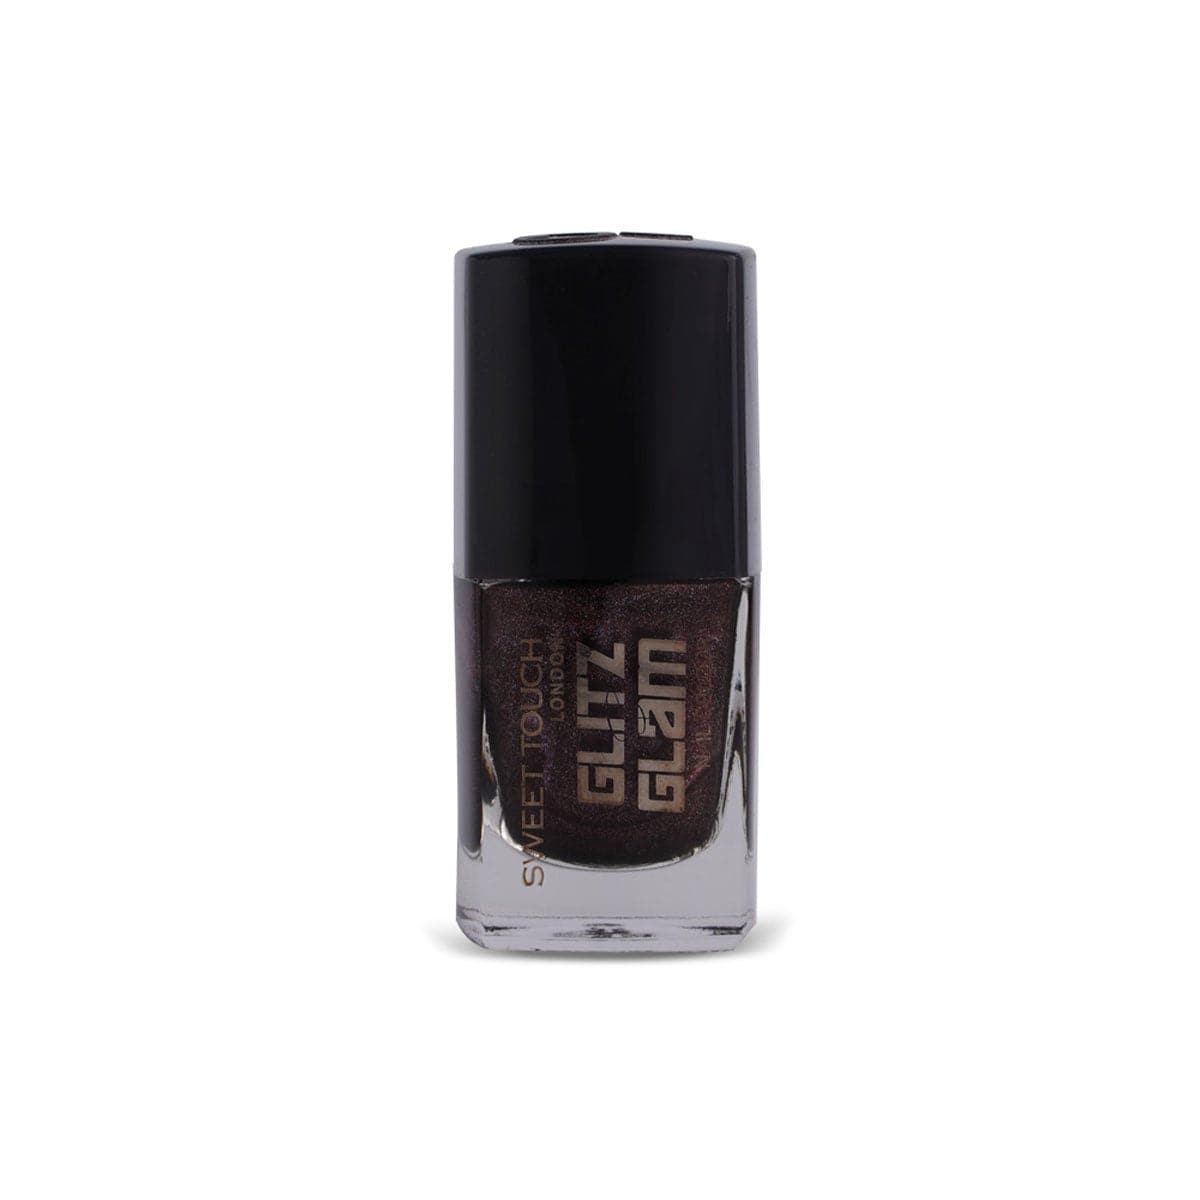 ST London Glitz & Glam Nail Paint - St251 Galaxy - Premium Health & Beauty from St London - Just Rs 430.00! Shop now at Cozmetica